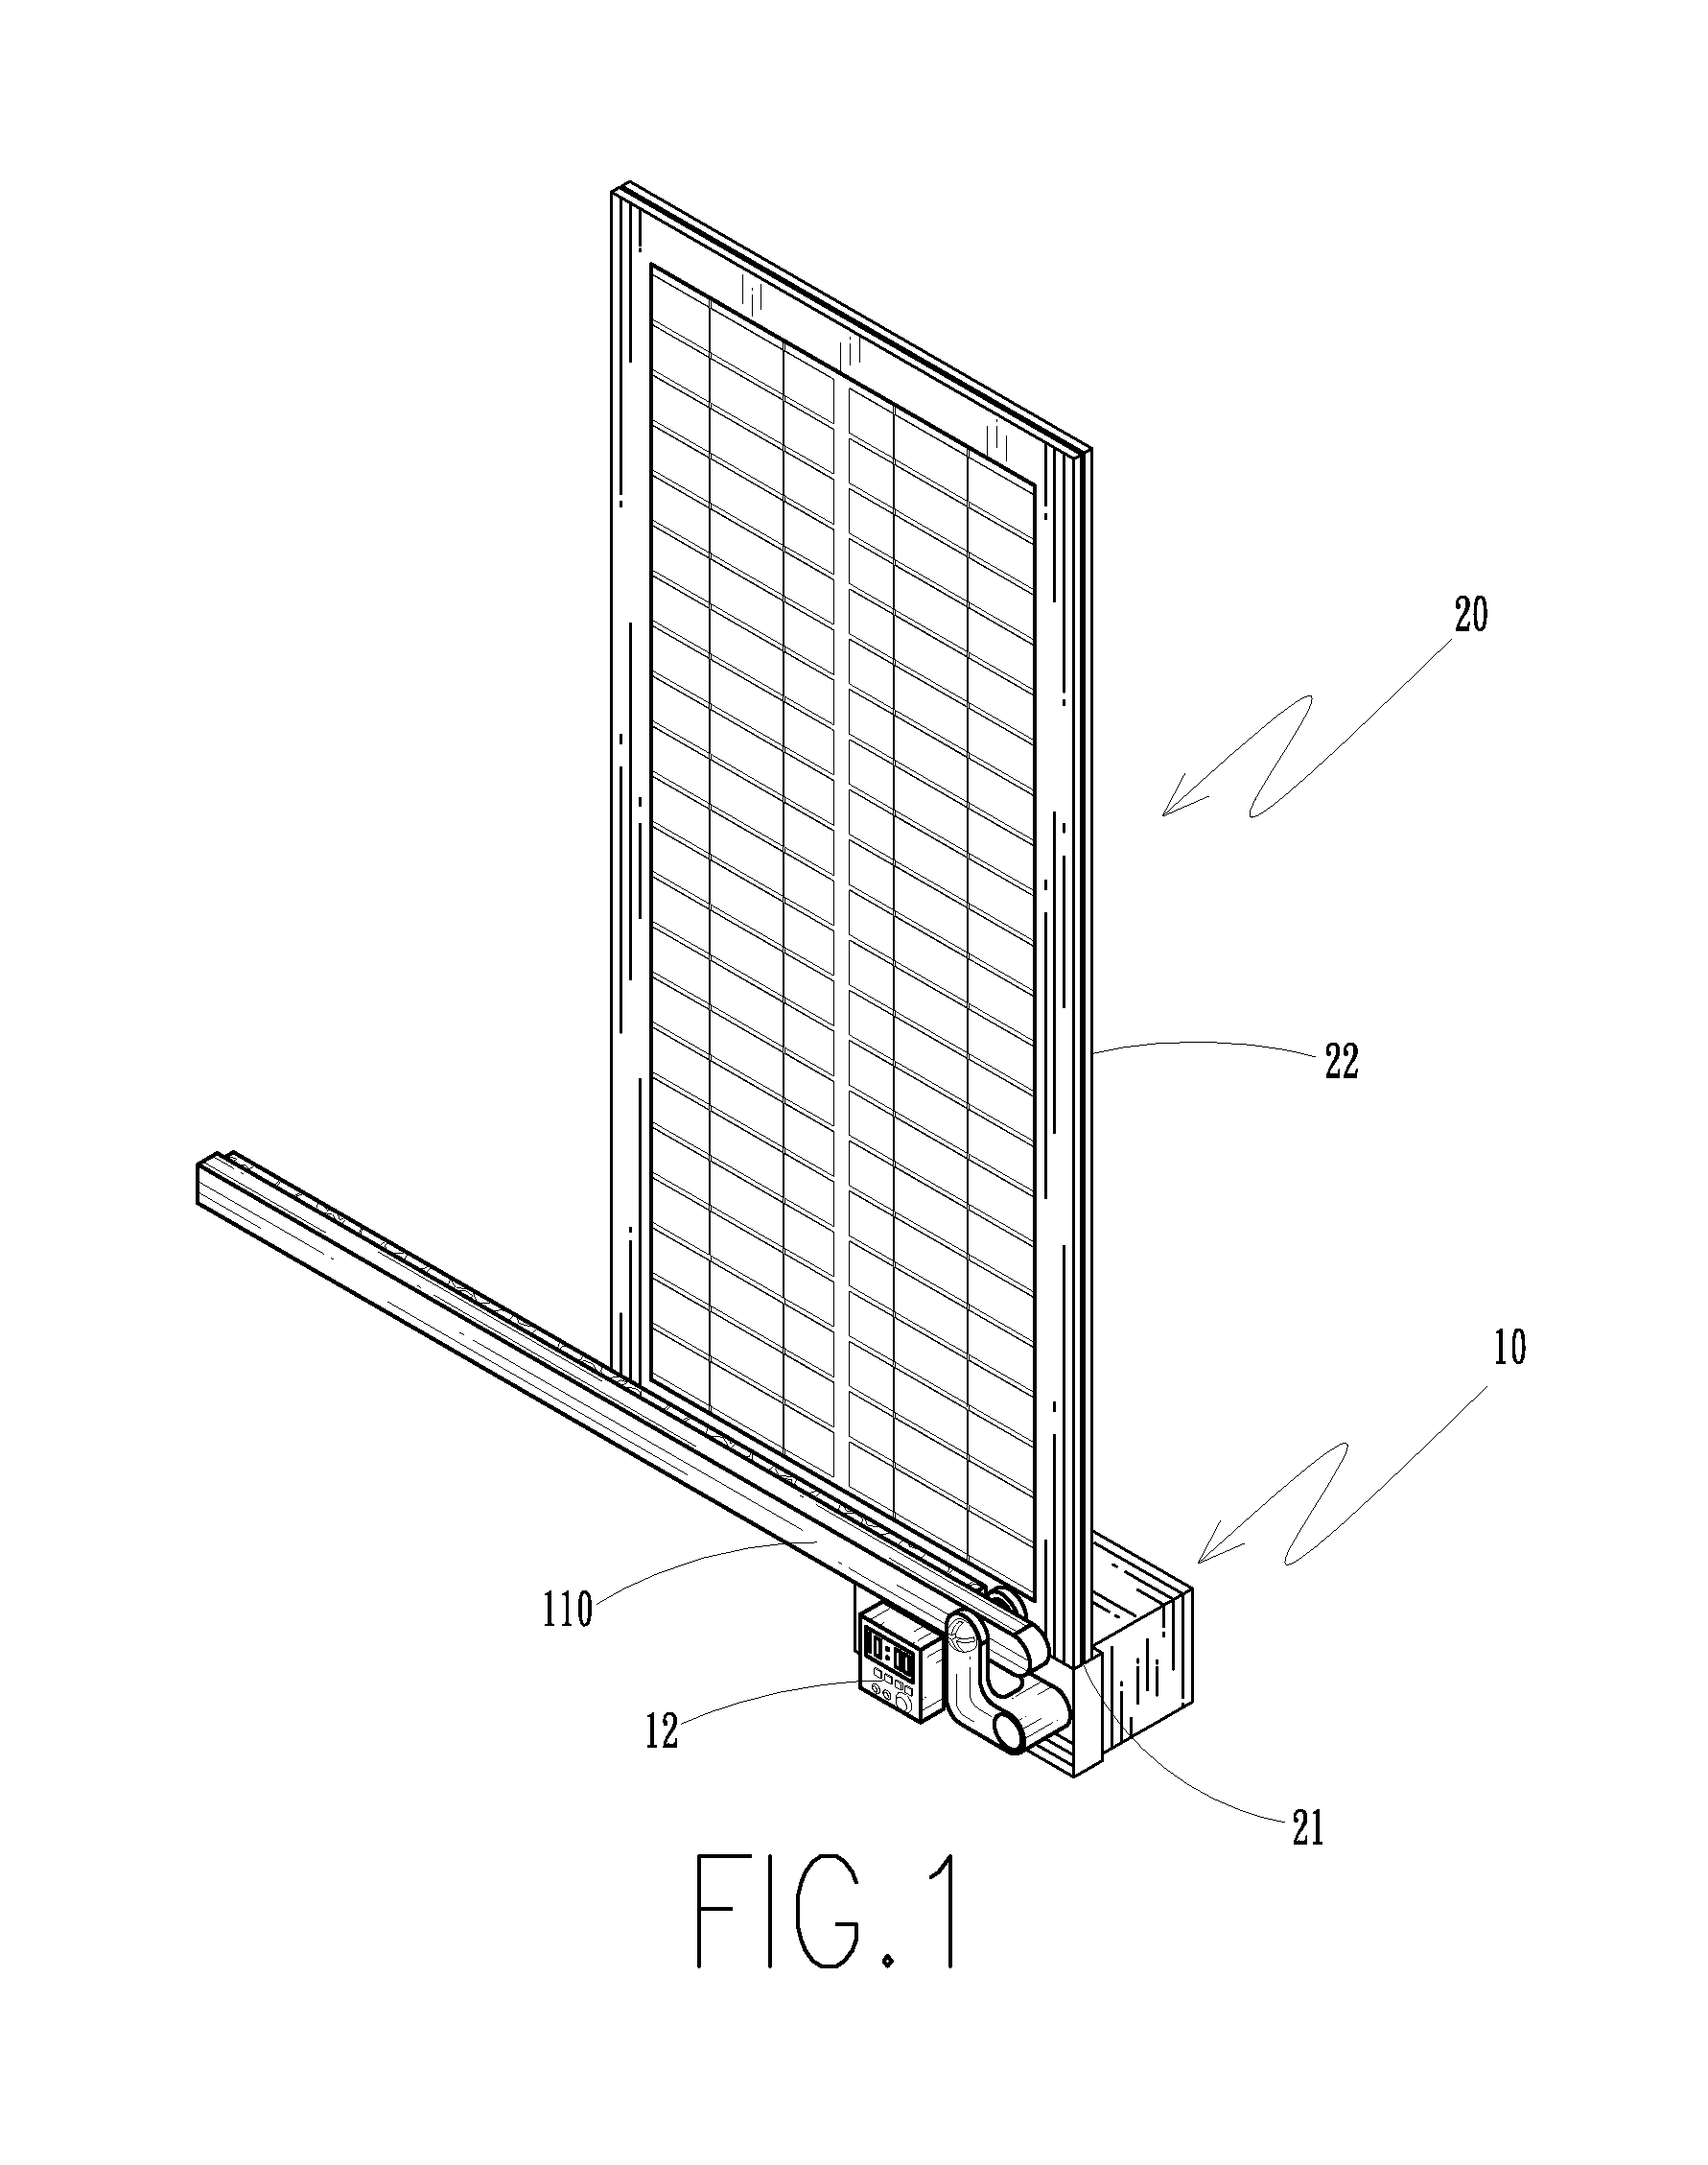 Cleaning apparatus for solar panels